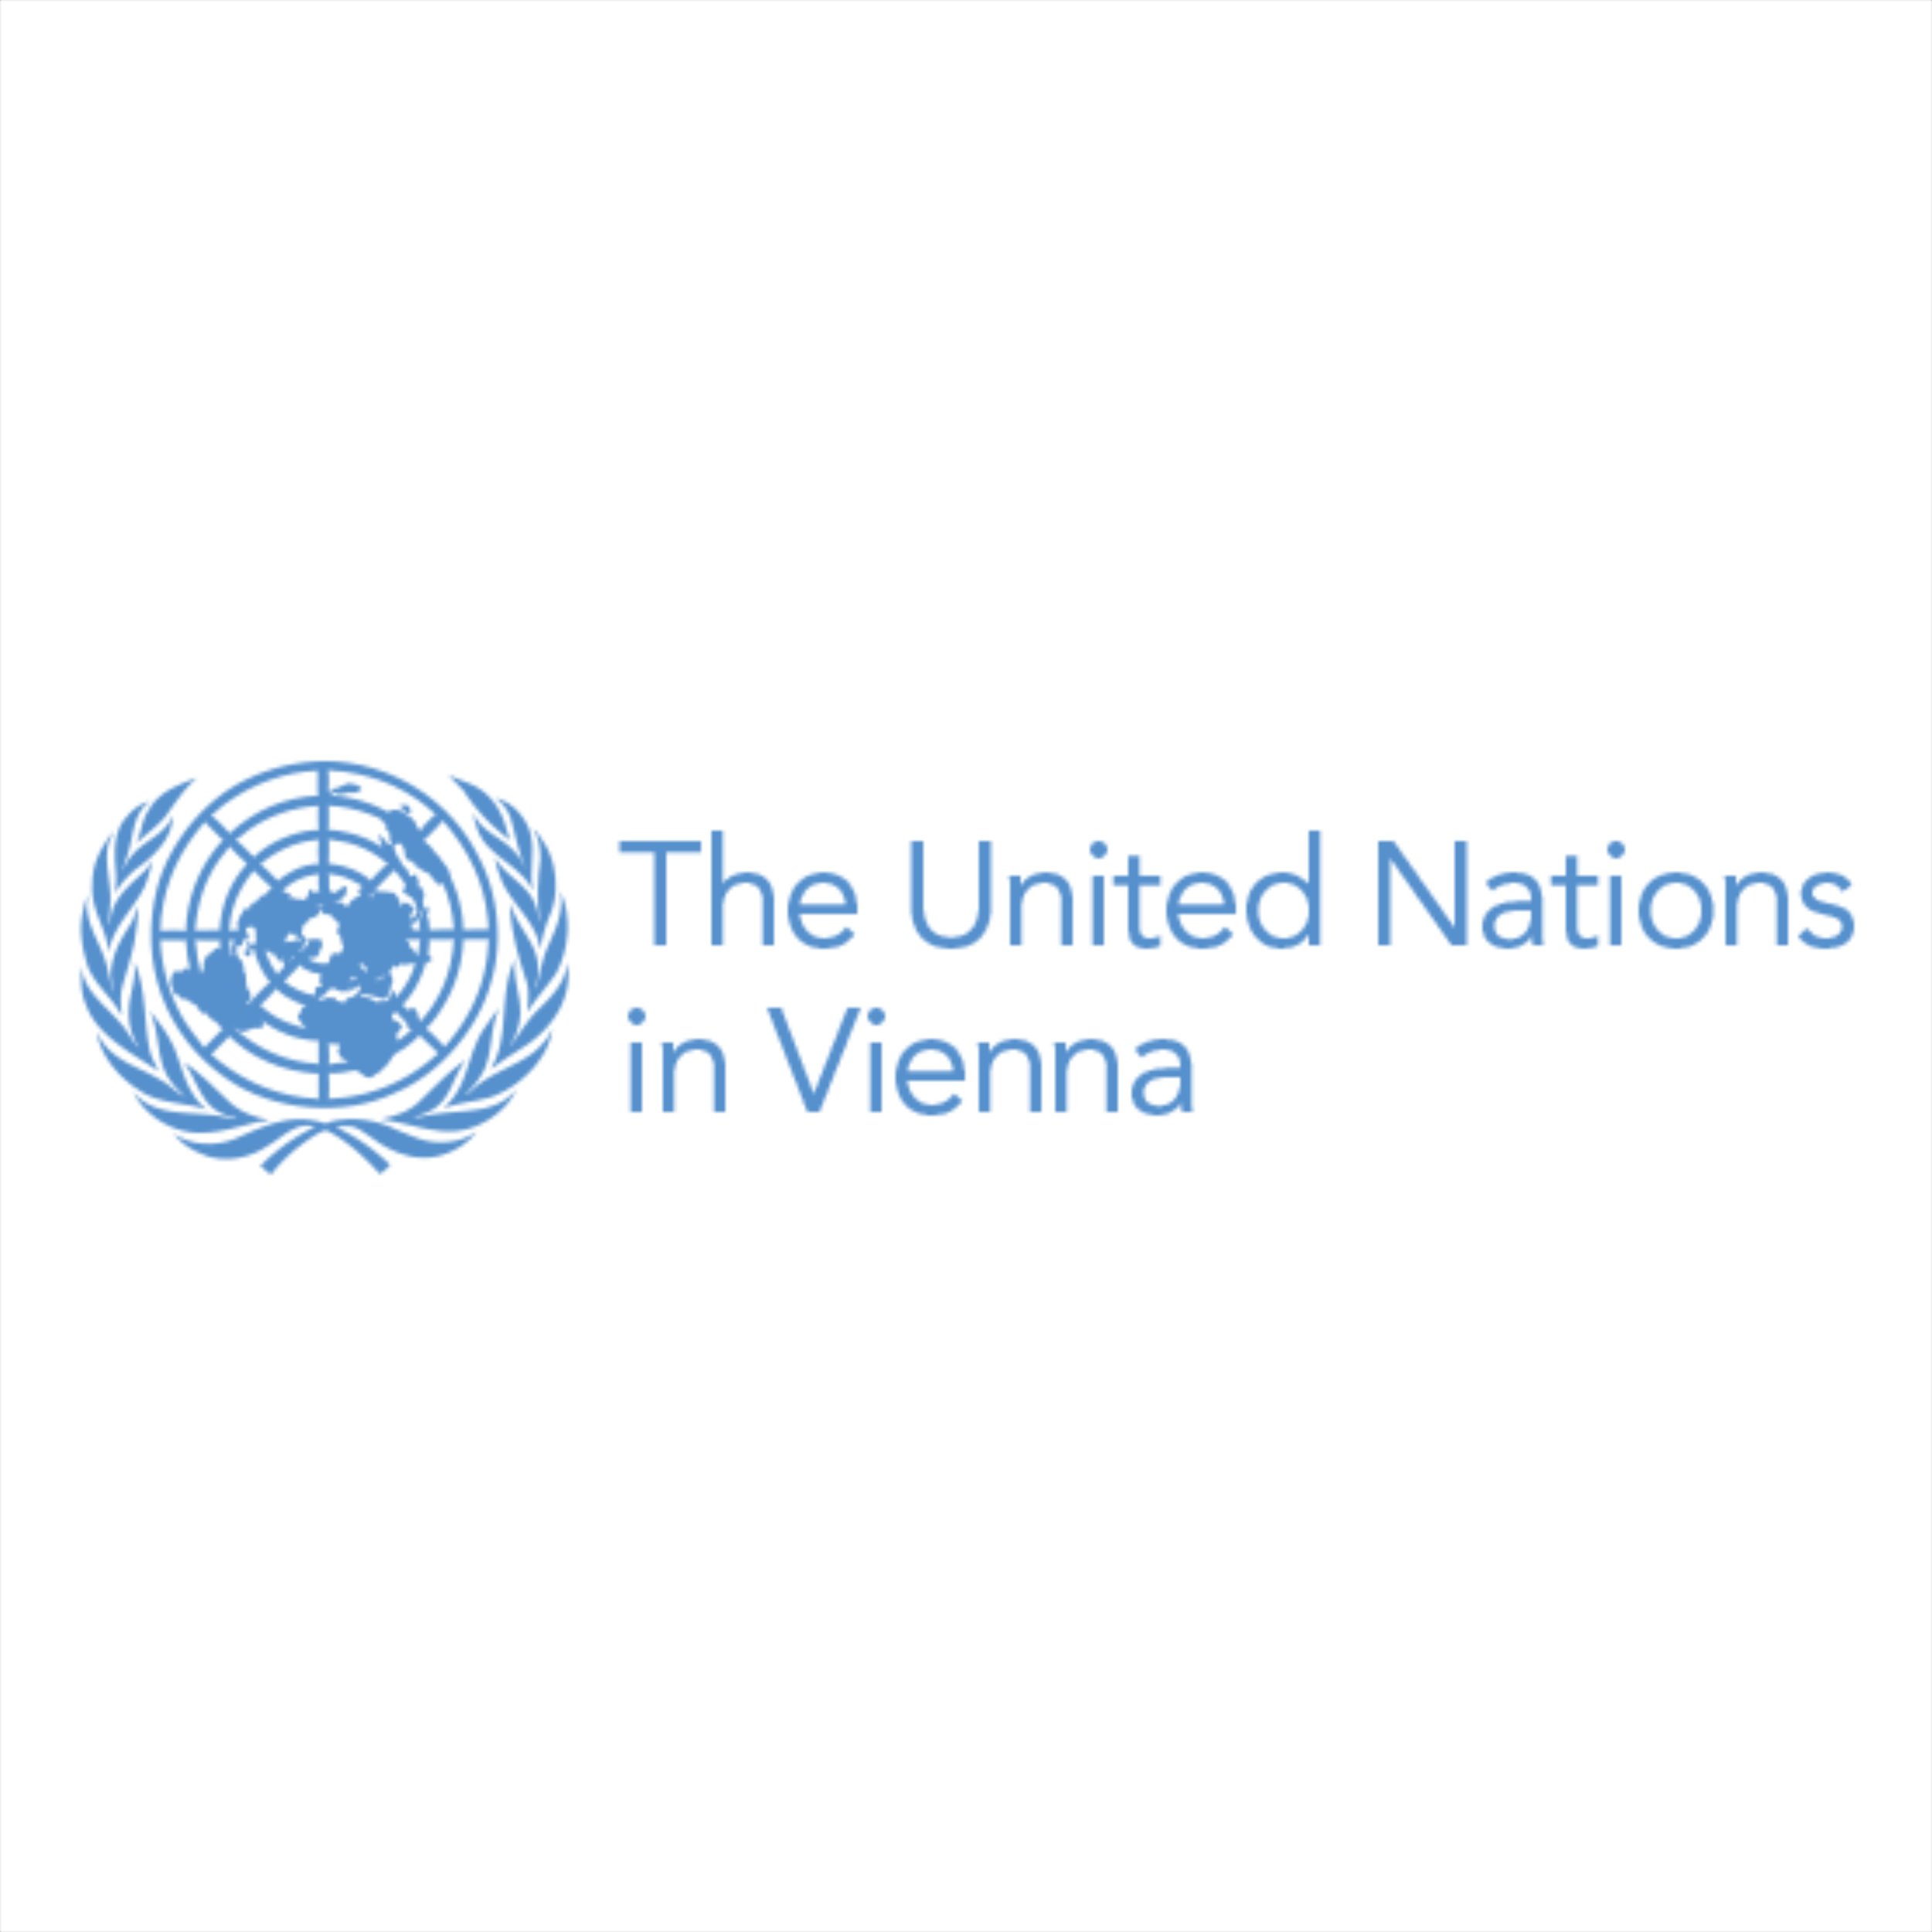 The United Nations in Vienna